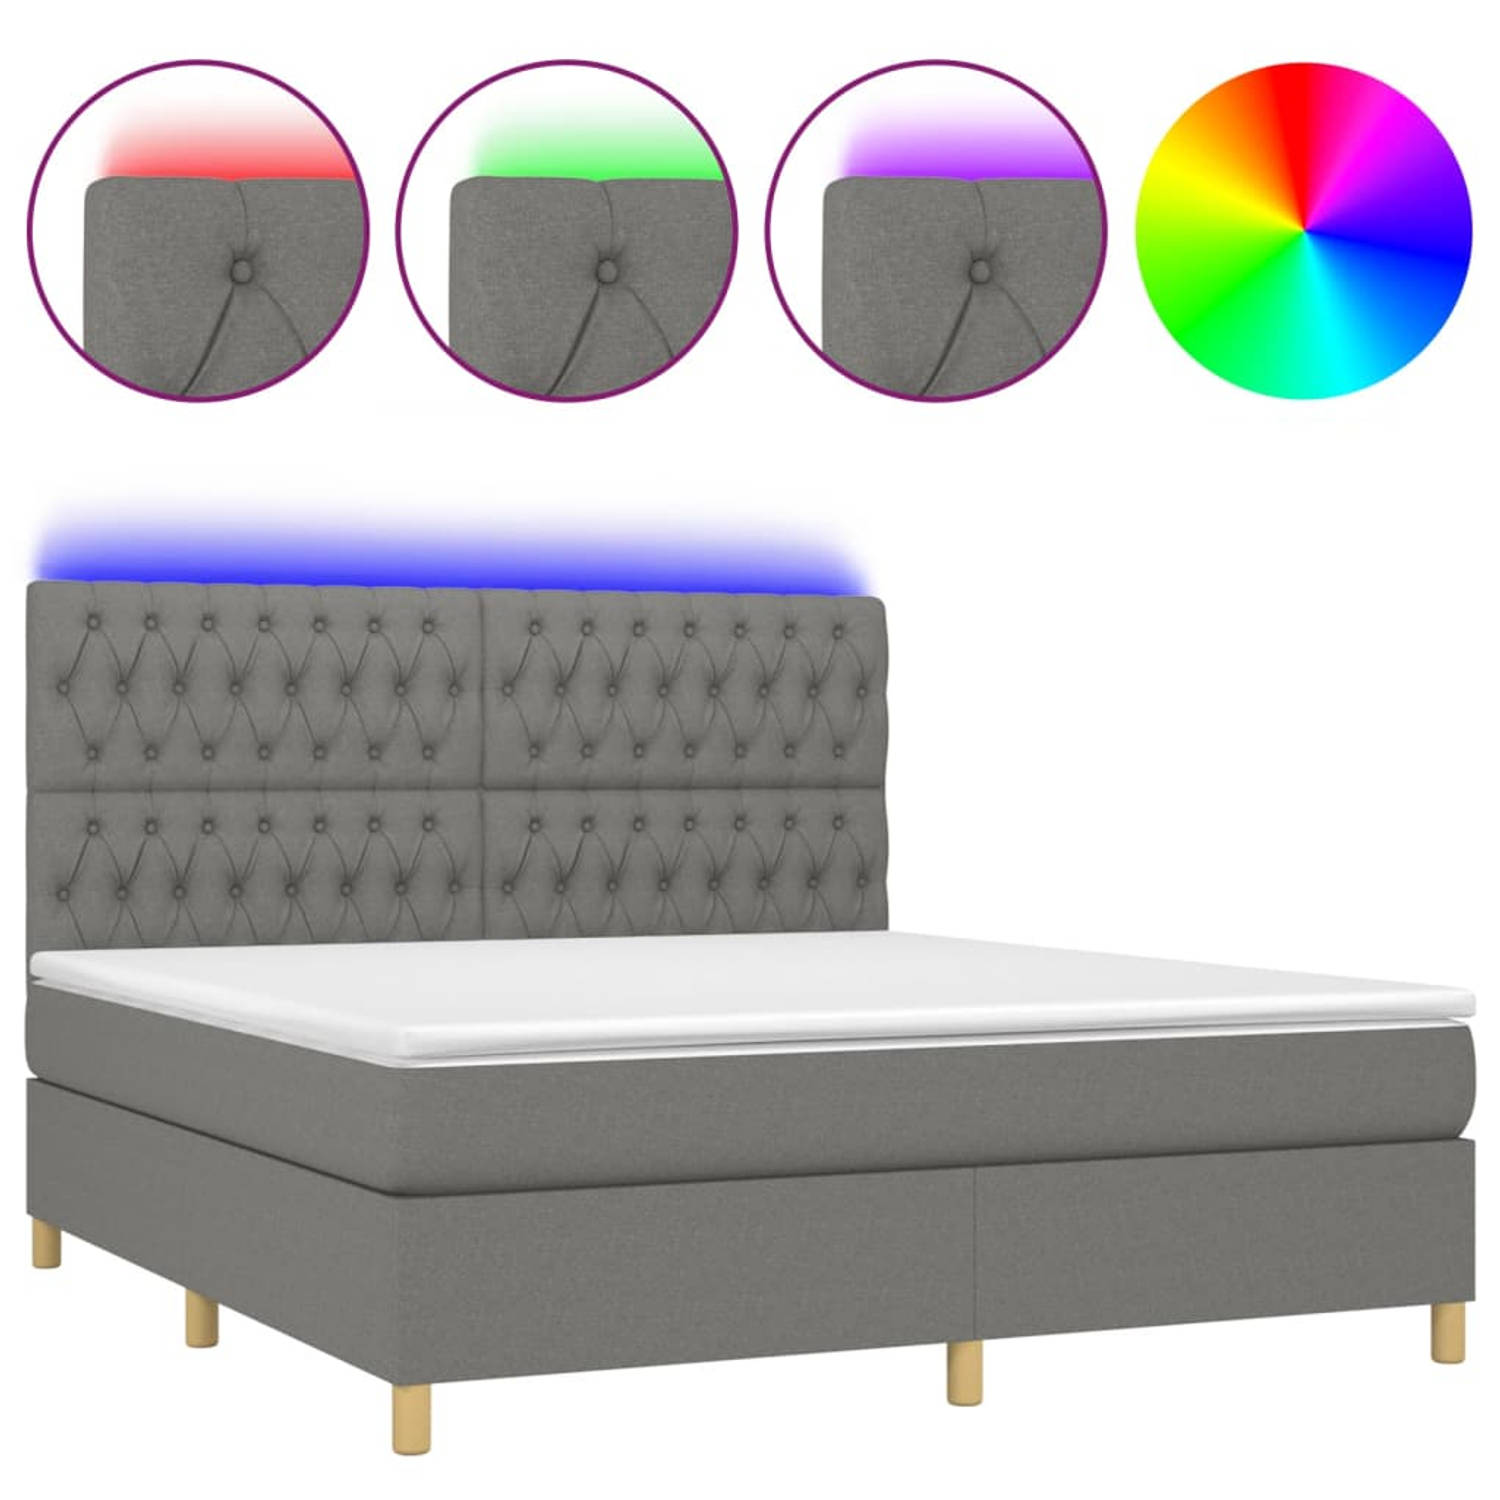 The Living Store Boxspring met matras en LED stof donkergrijs 160x200 cm - Boxspring - Boxsprings - Bed - Slaapmeubel - Boxspringbed - Boxspring Bed - Tweepersoonsbed - Bed Met Mat